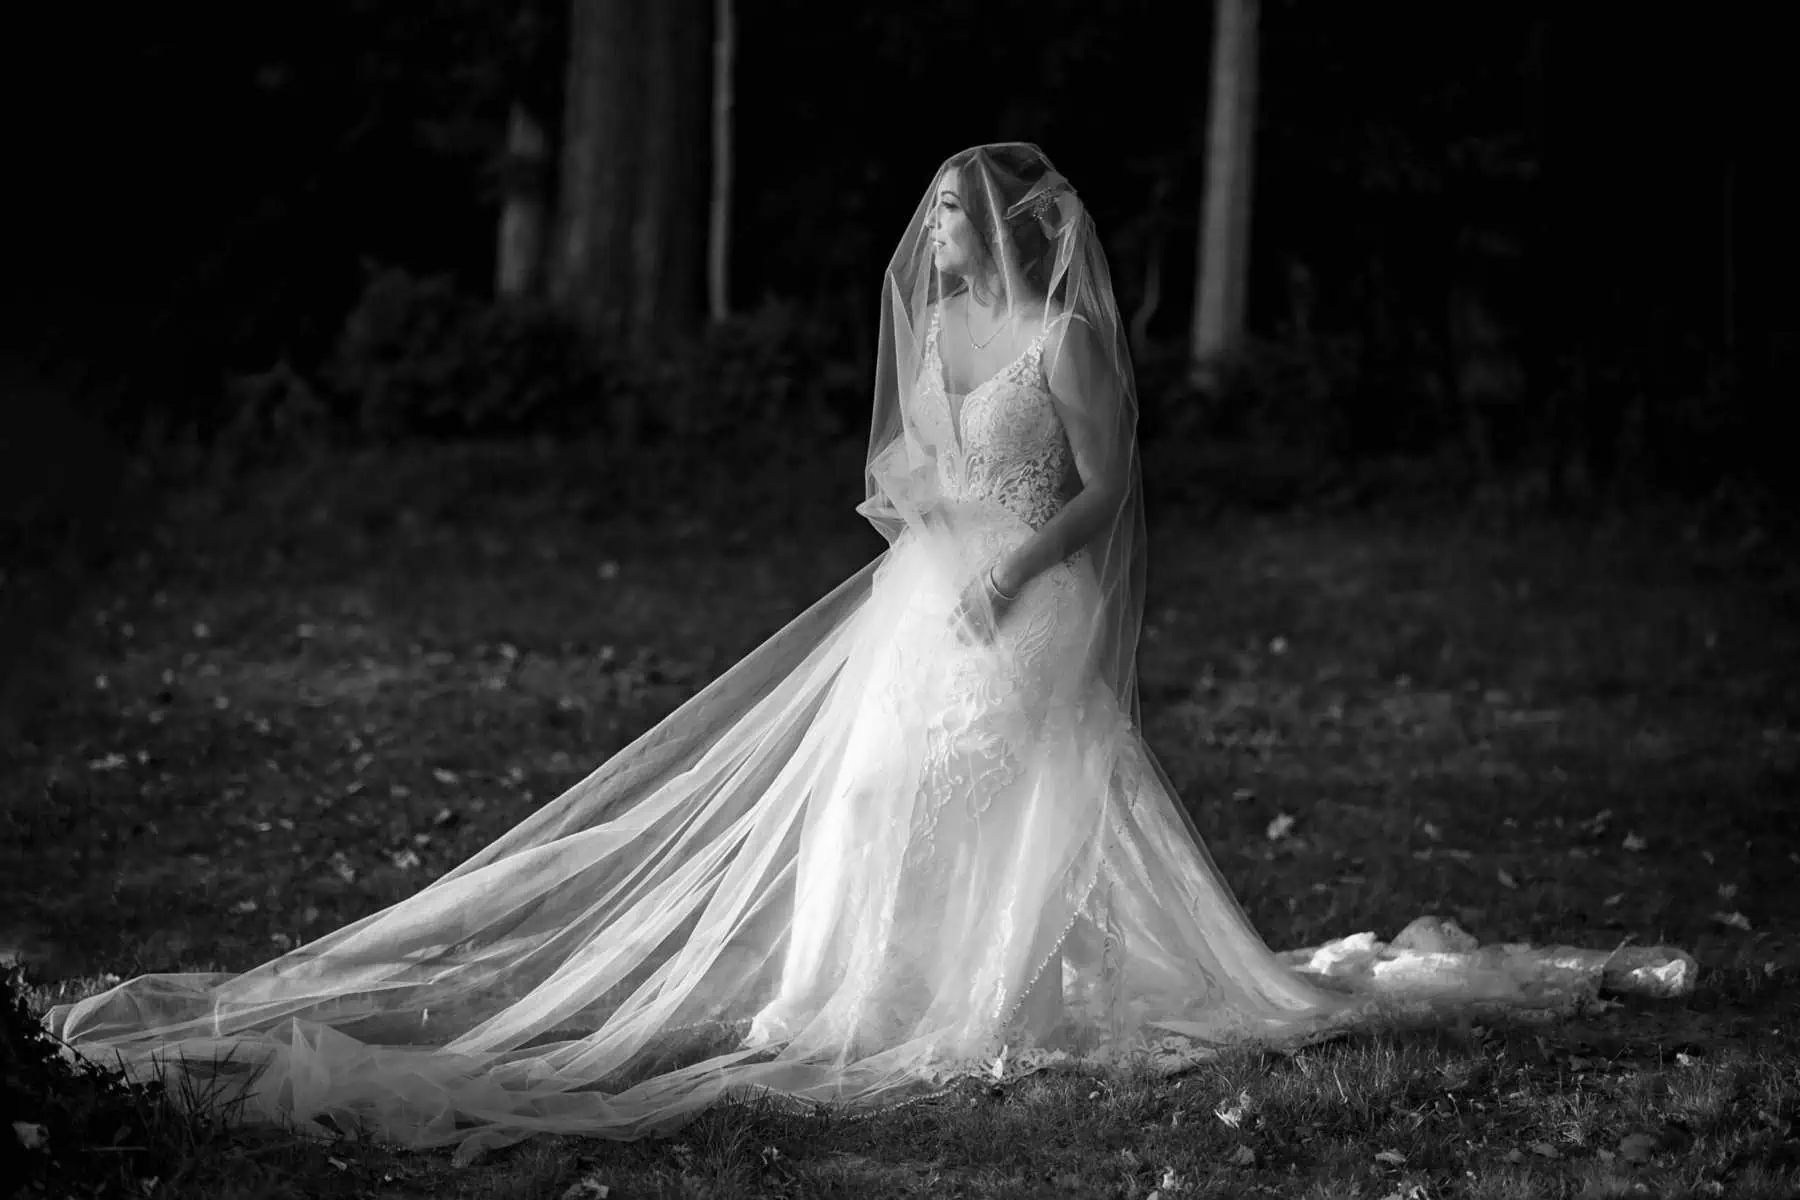 A black and white photo of a bride in a wedding dress.